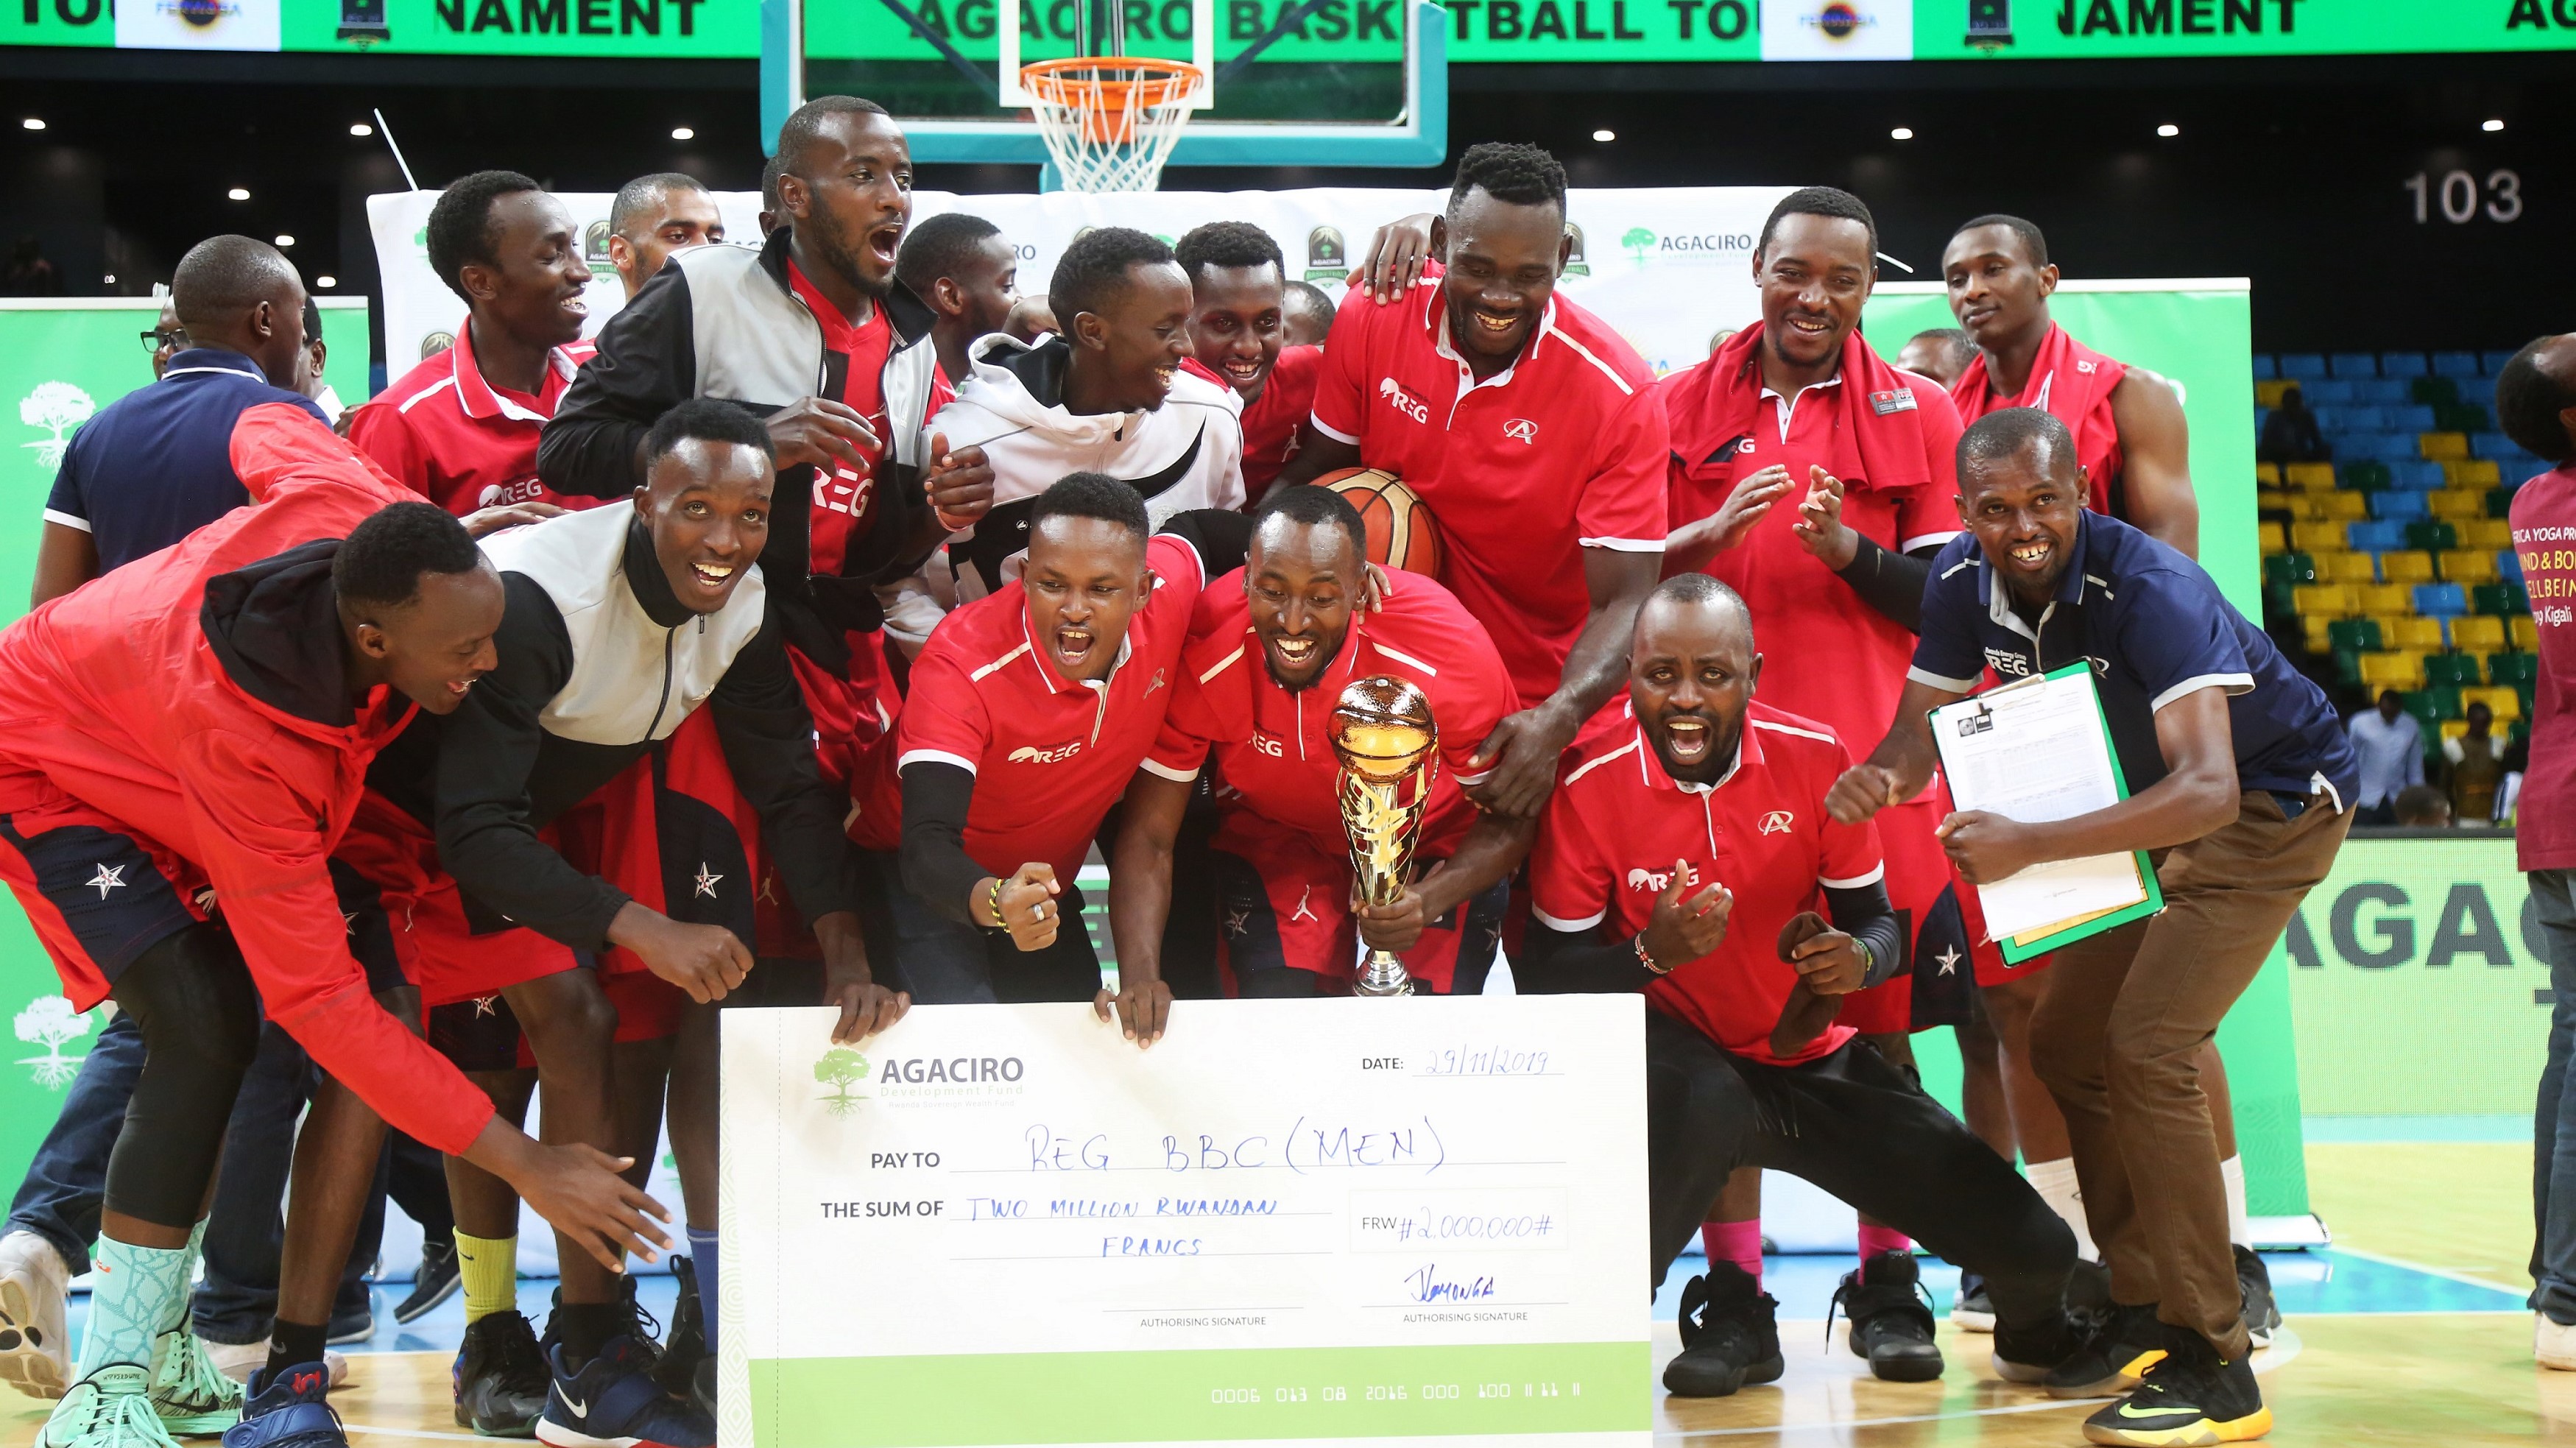 REG lifted the title in men's category after beating Patriots 61-50 in the final at Kigali Arena on Friday. /Sam Ngendahimana